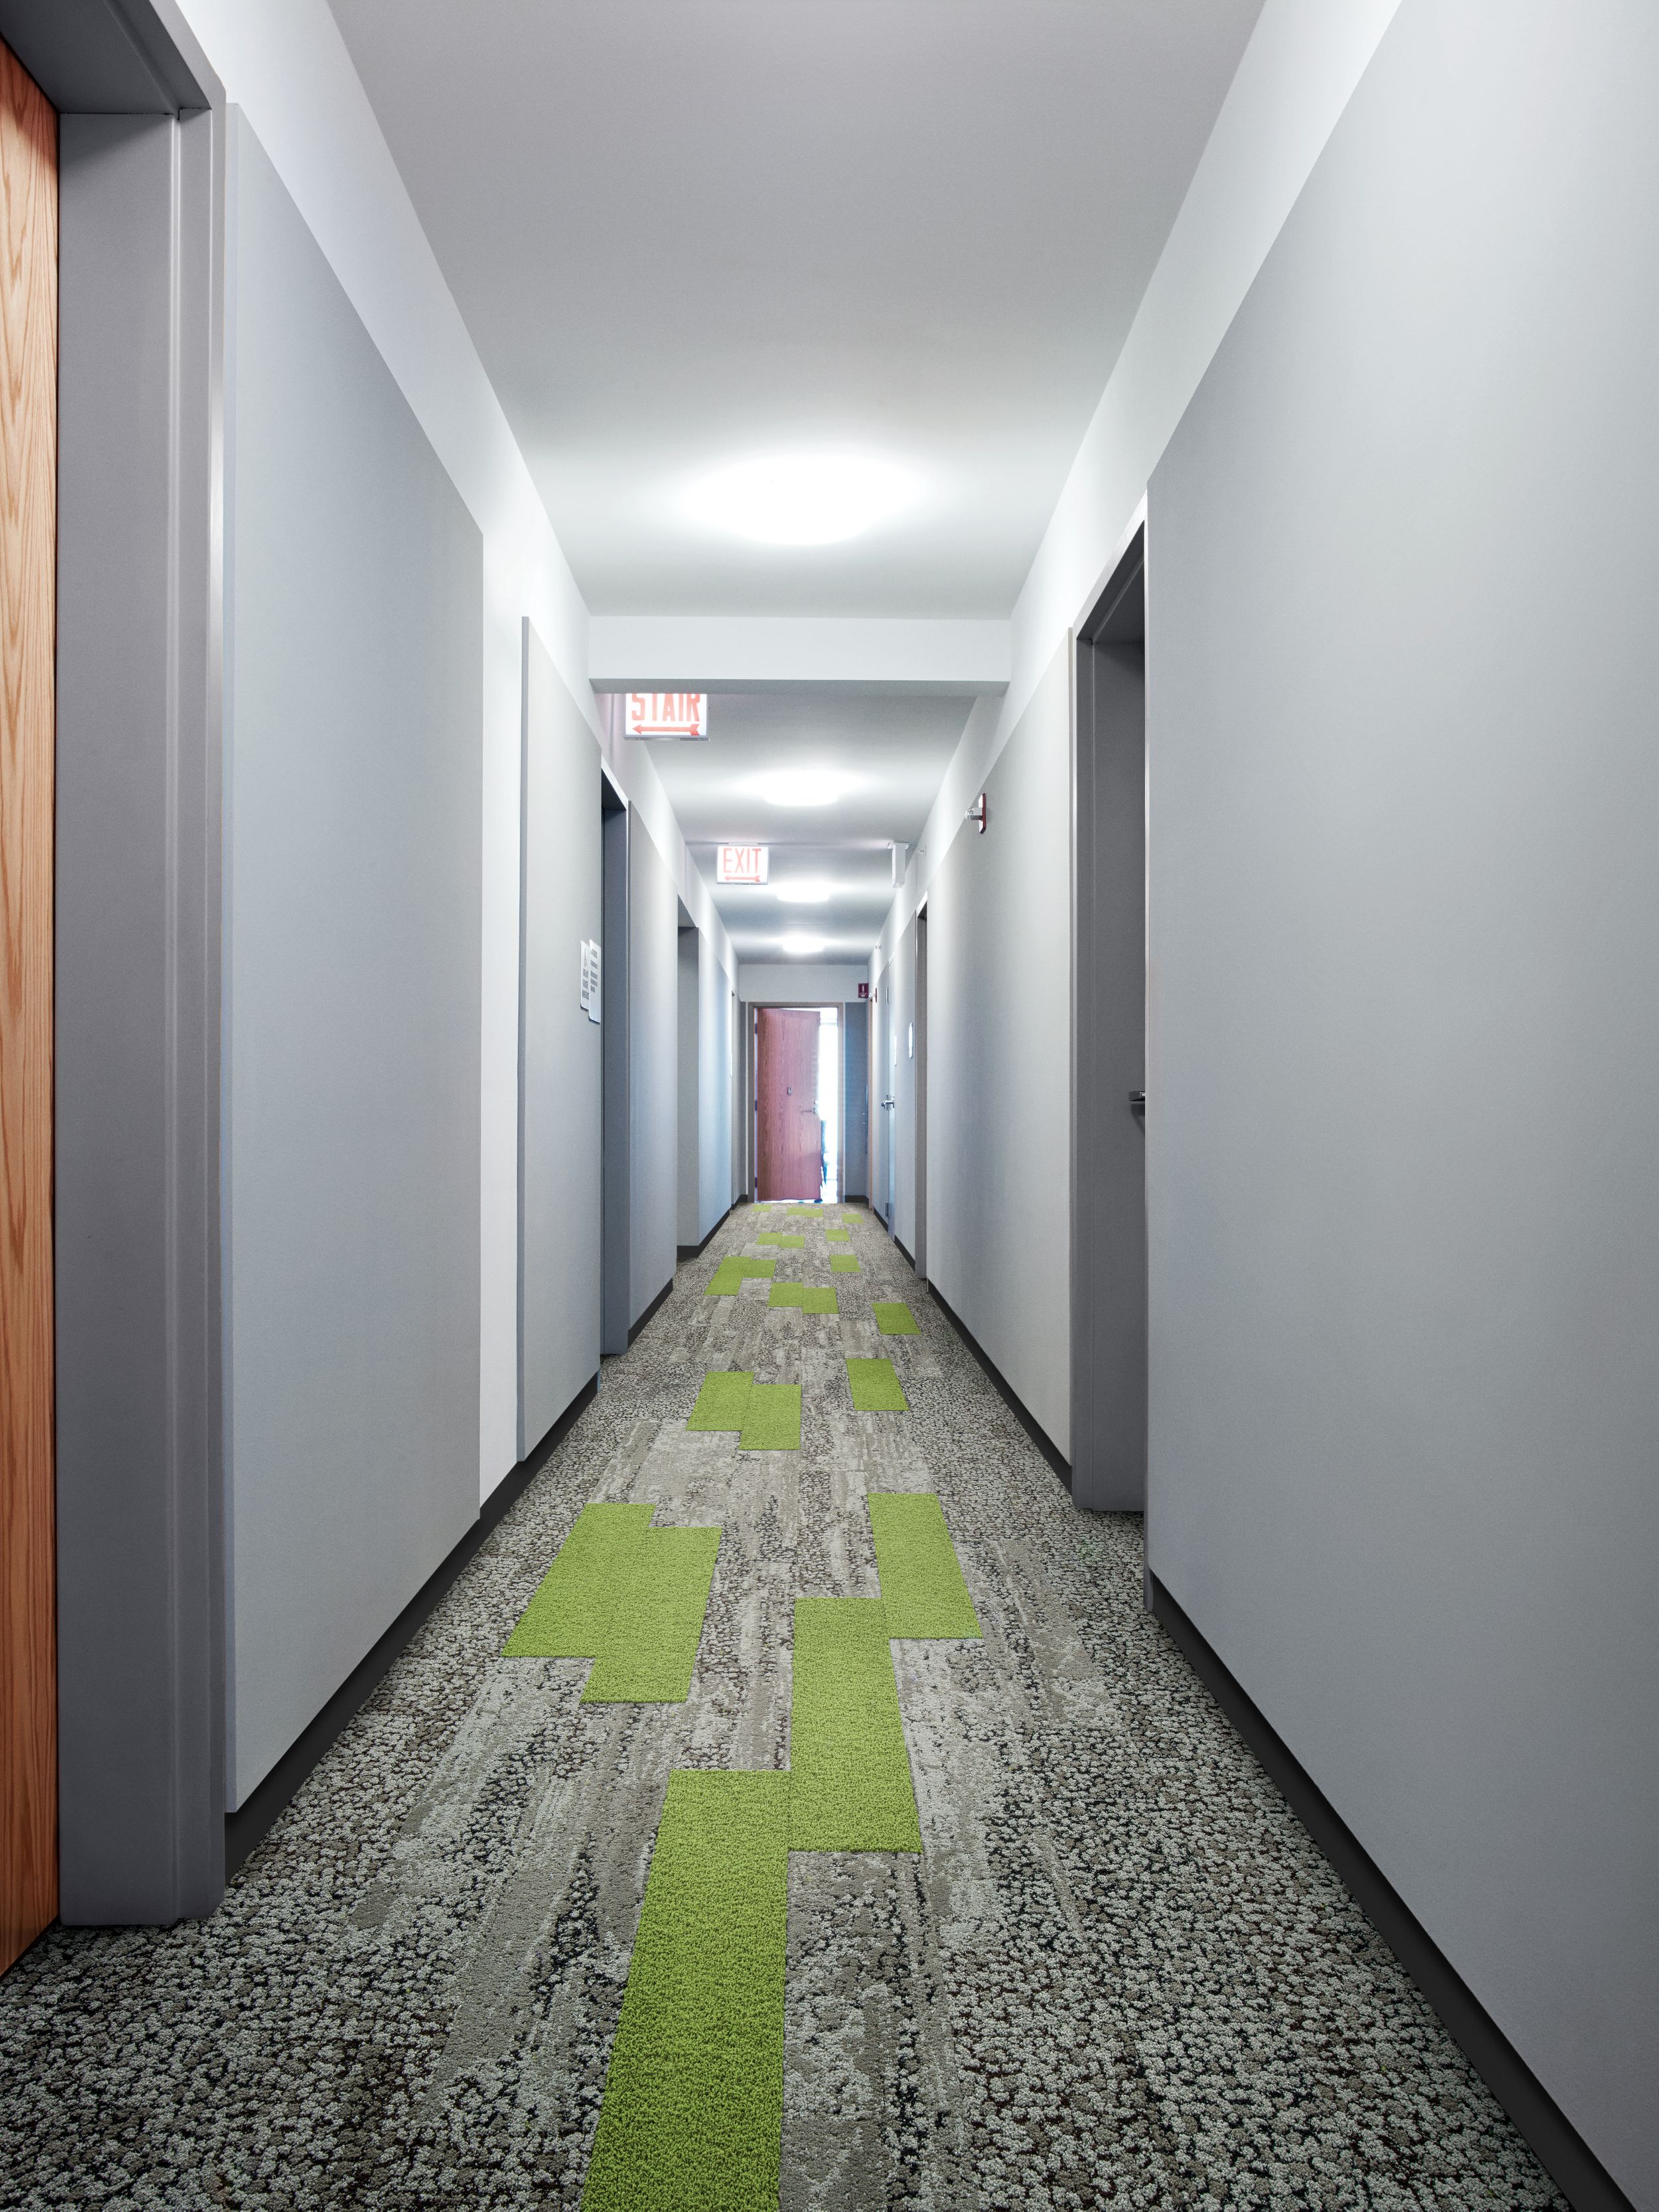 Interface HN830 and HN850 plank carpet tiles in long corridor with mutliple doors and wood door at end numéro d’image 3